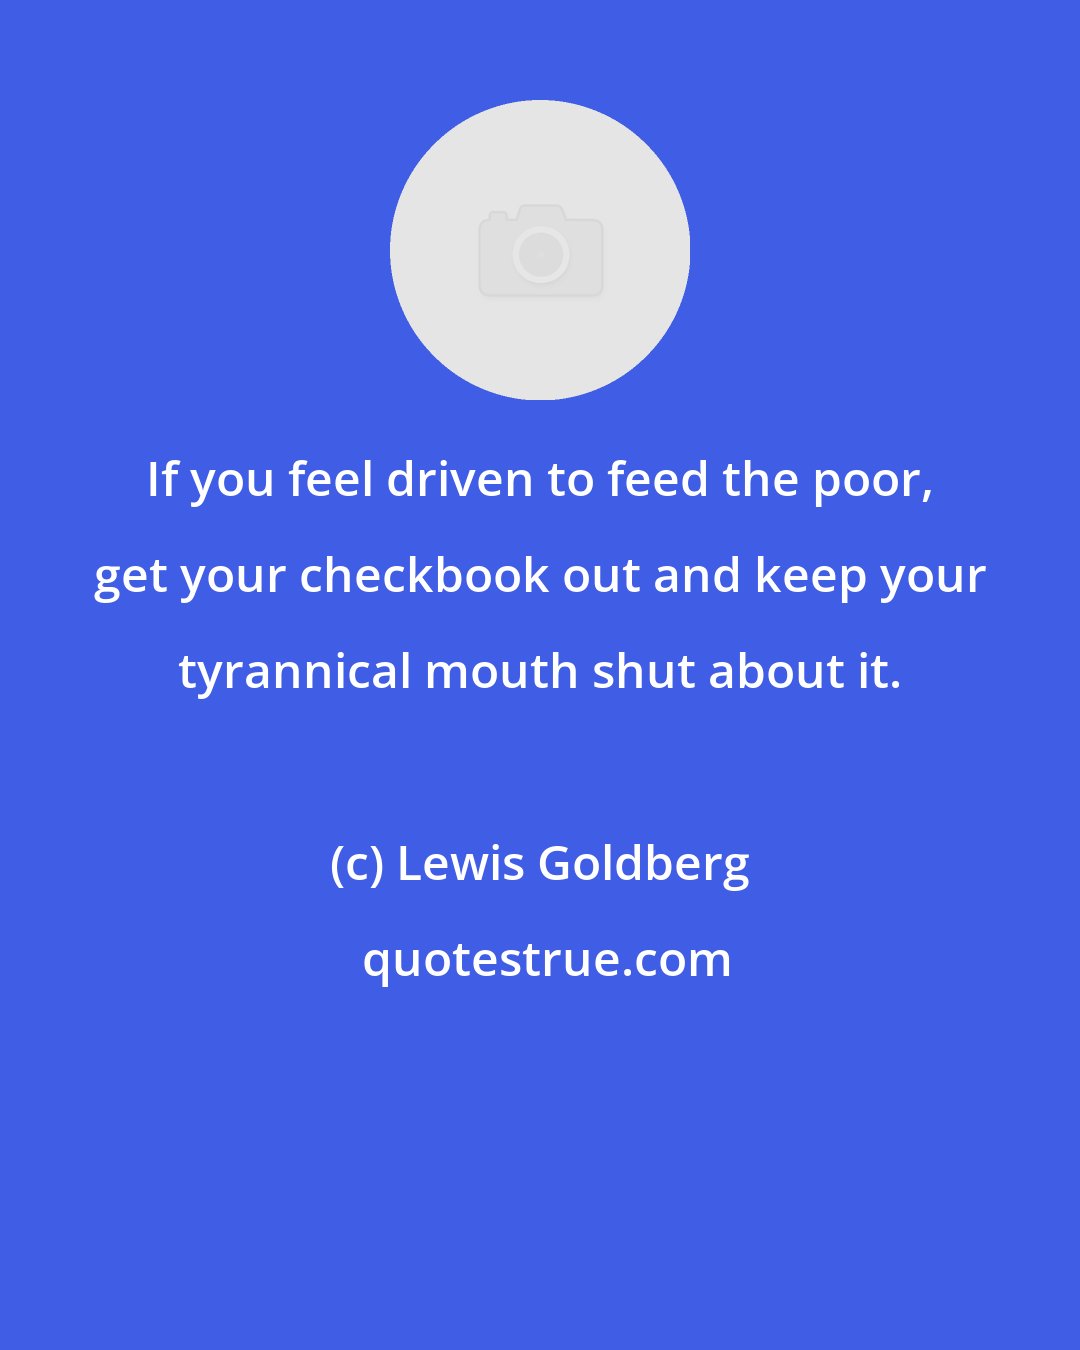 Lewis Goldberg: If you feel driven to feed the poor, get your checkbook out and keep your tyrannical mouth shut about it.